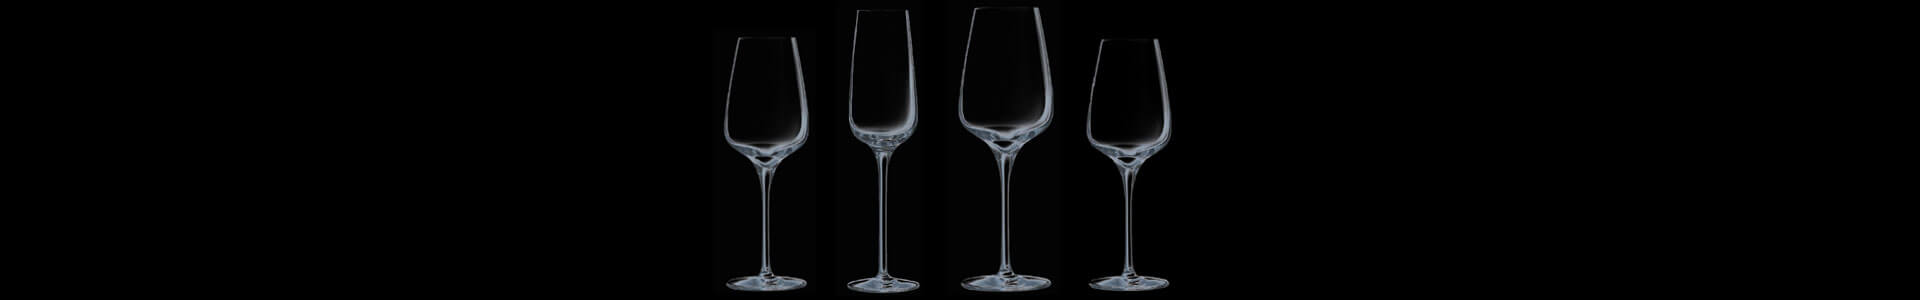 Wine and champagne glasses from the Sublym series by Chef & Sommelier.